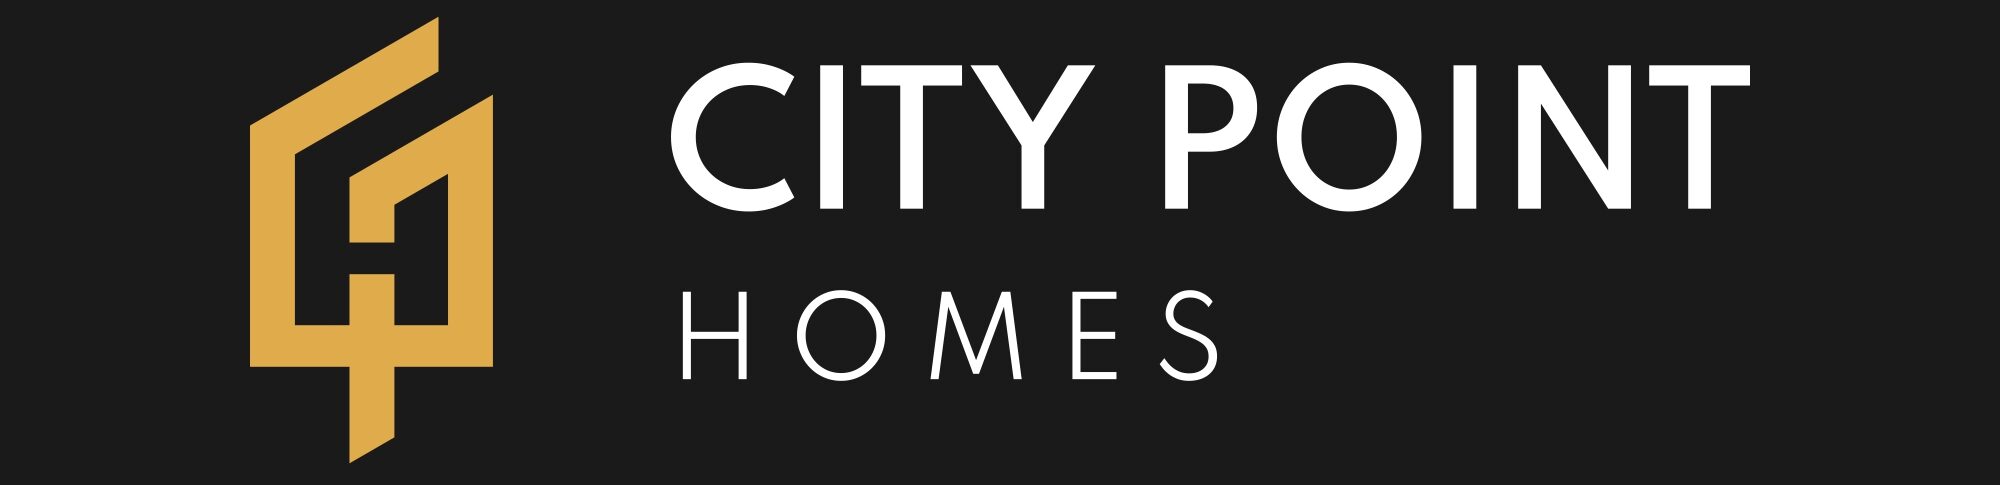 City Point Homes | Don't Buy THEIR House, Build YOURS!